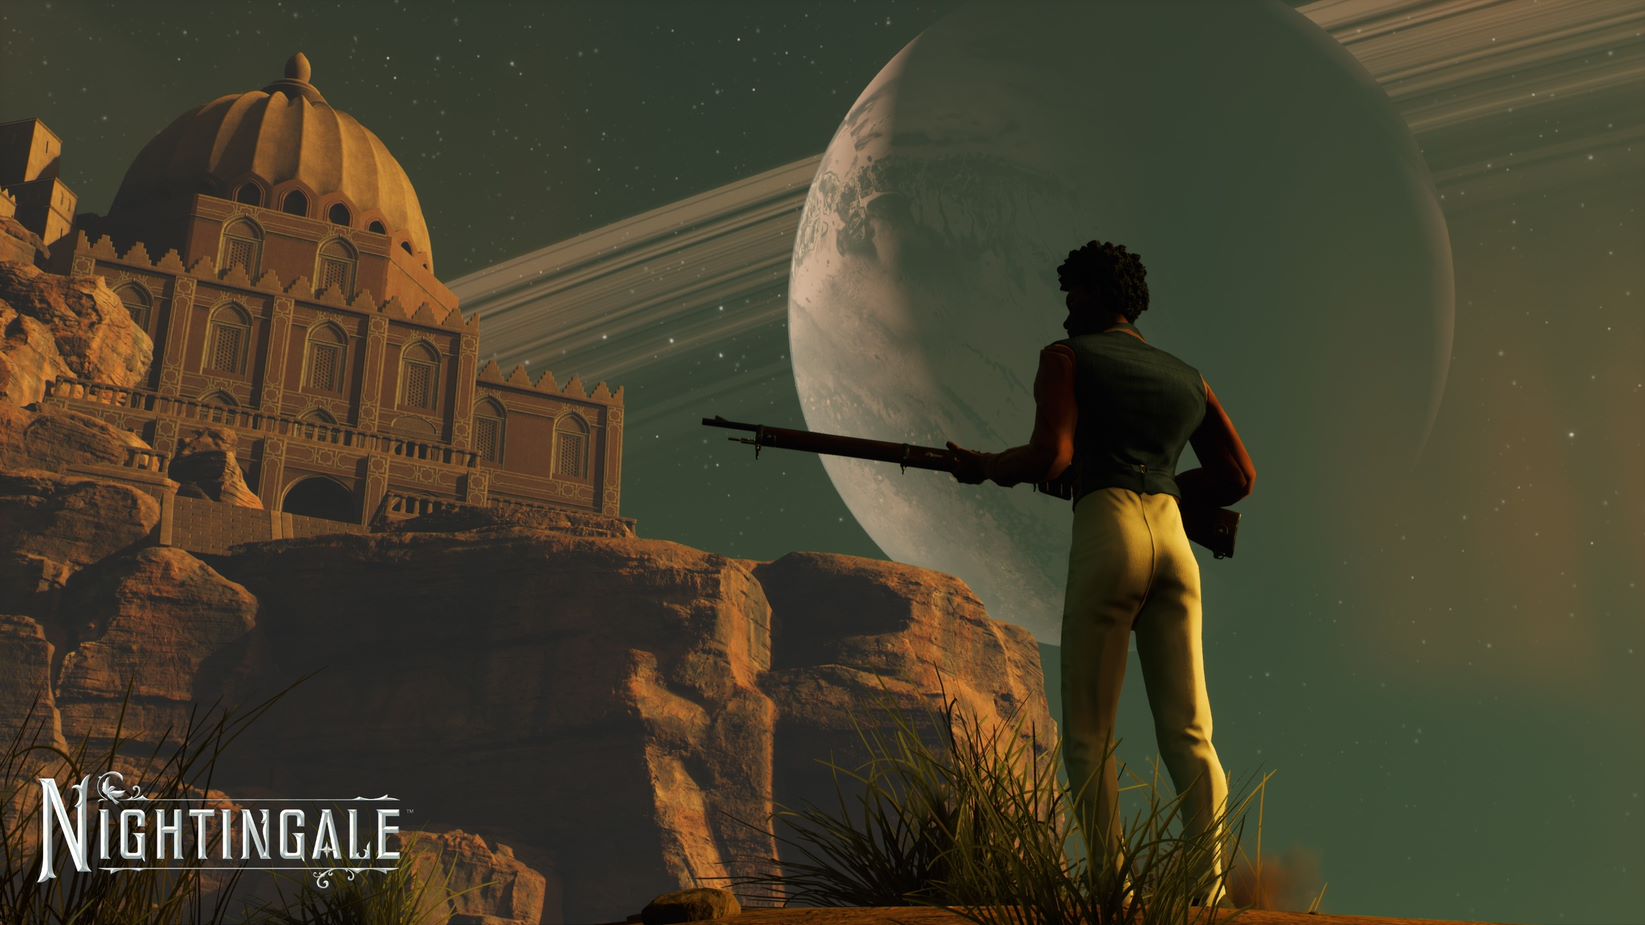 A screenshot from Nightingale which shows the player wielding a rifle and looking at beautiful, domed building as the moon sits in the sky.